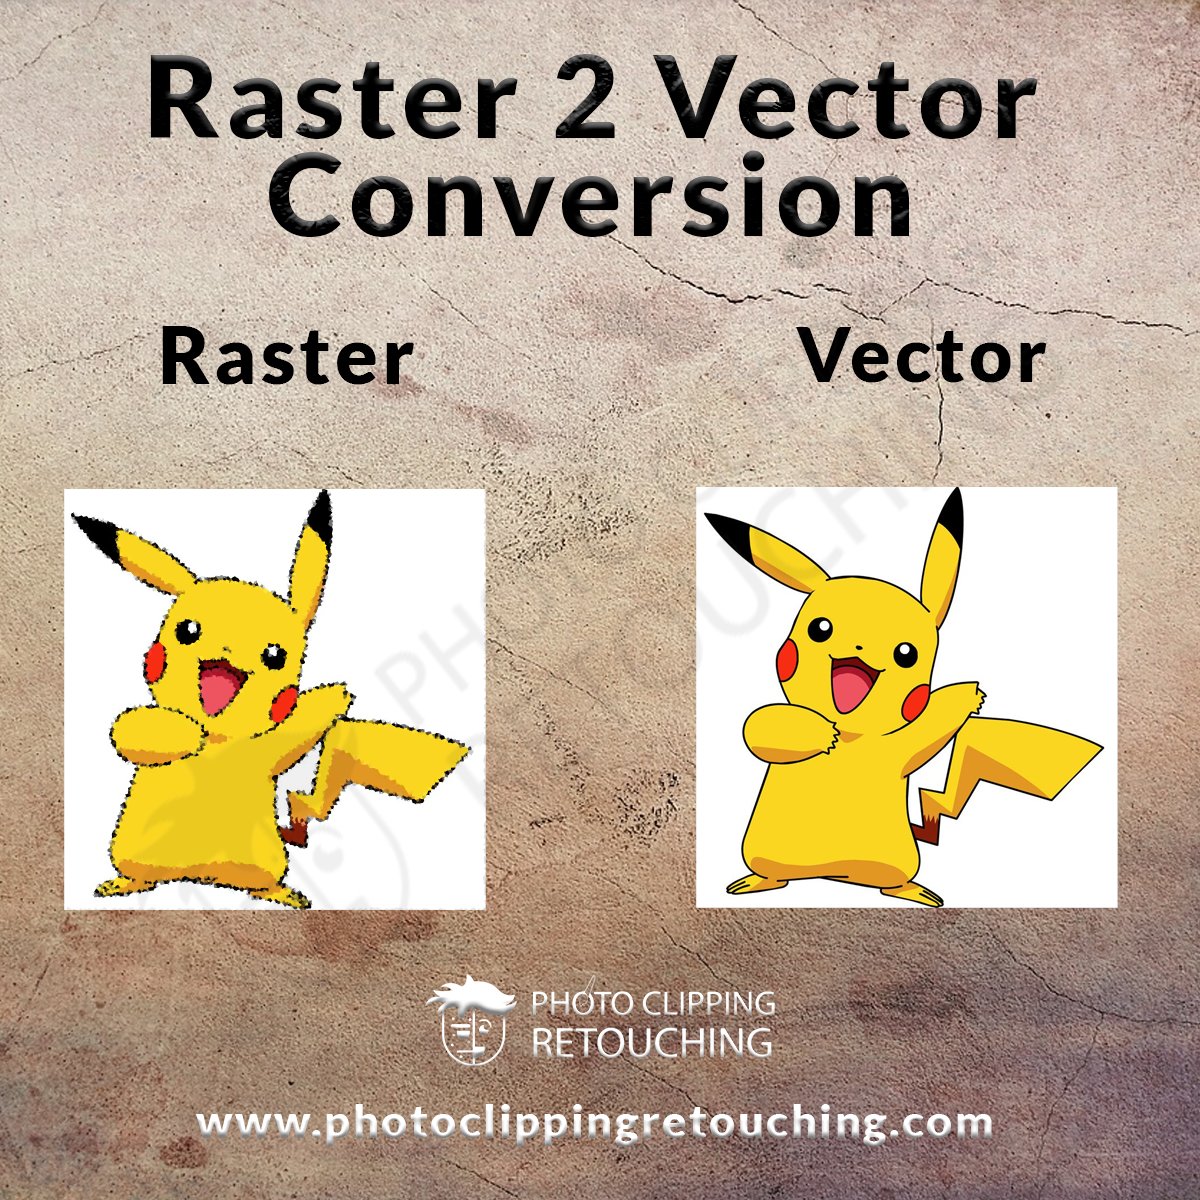 Transform fuzzy images into sharp masterpieces with our Raster to Vector Conversion Service! #RasterToVector #VectorConversion #RasterConversion #PhotoEditing #EditingServices #GraphicDesign #teamPCR Email: info@photoclippingretouching.com Link: photoclippingretouching.com/raster-to-vect…